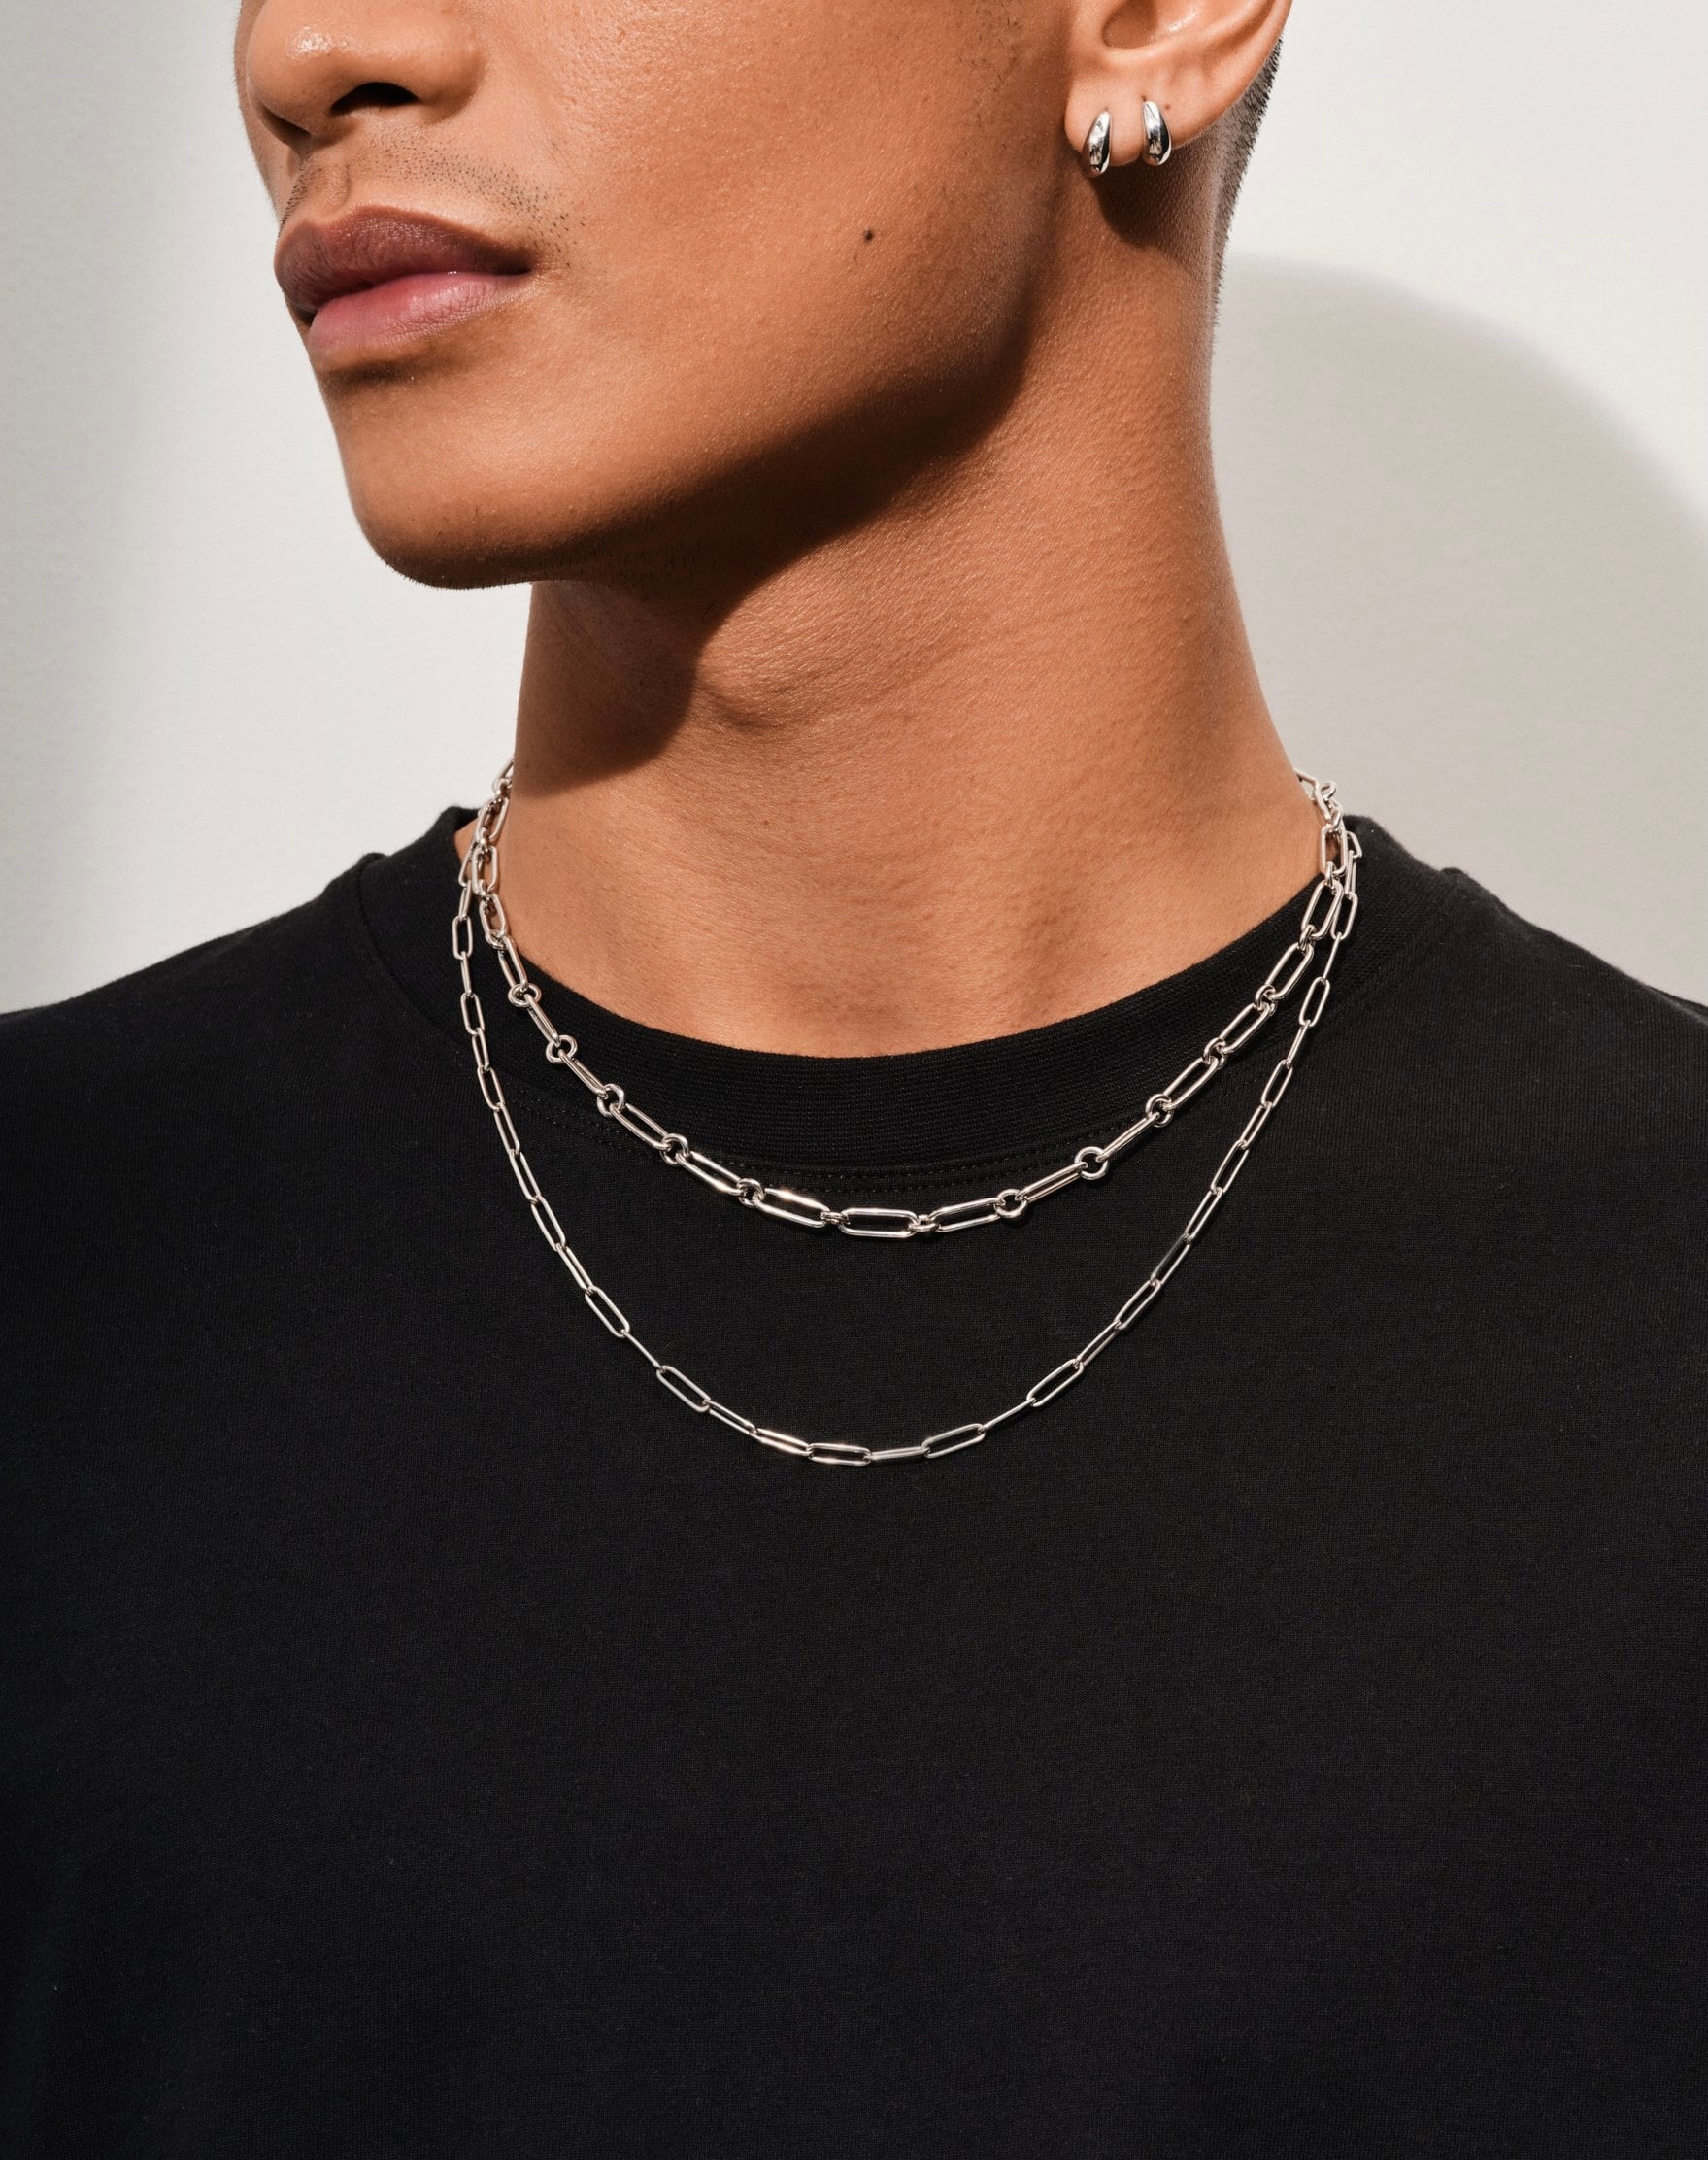 TOMWOOD / Box Chain Silver necklace16.5inch / ネックレス | LA ...